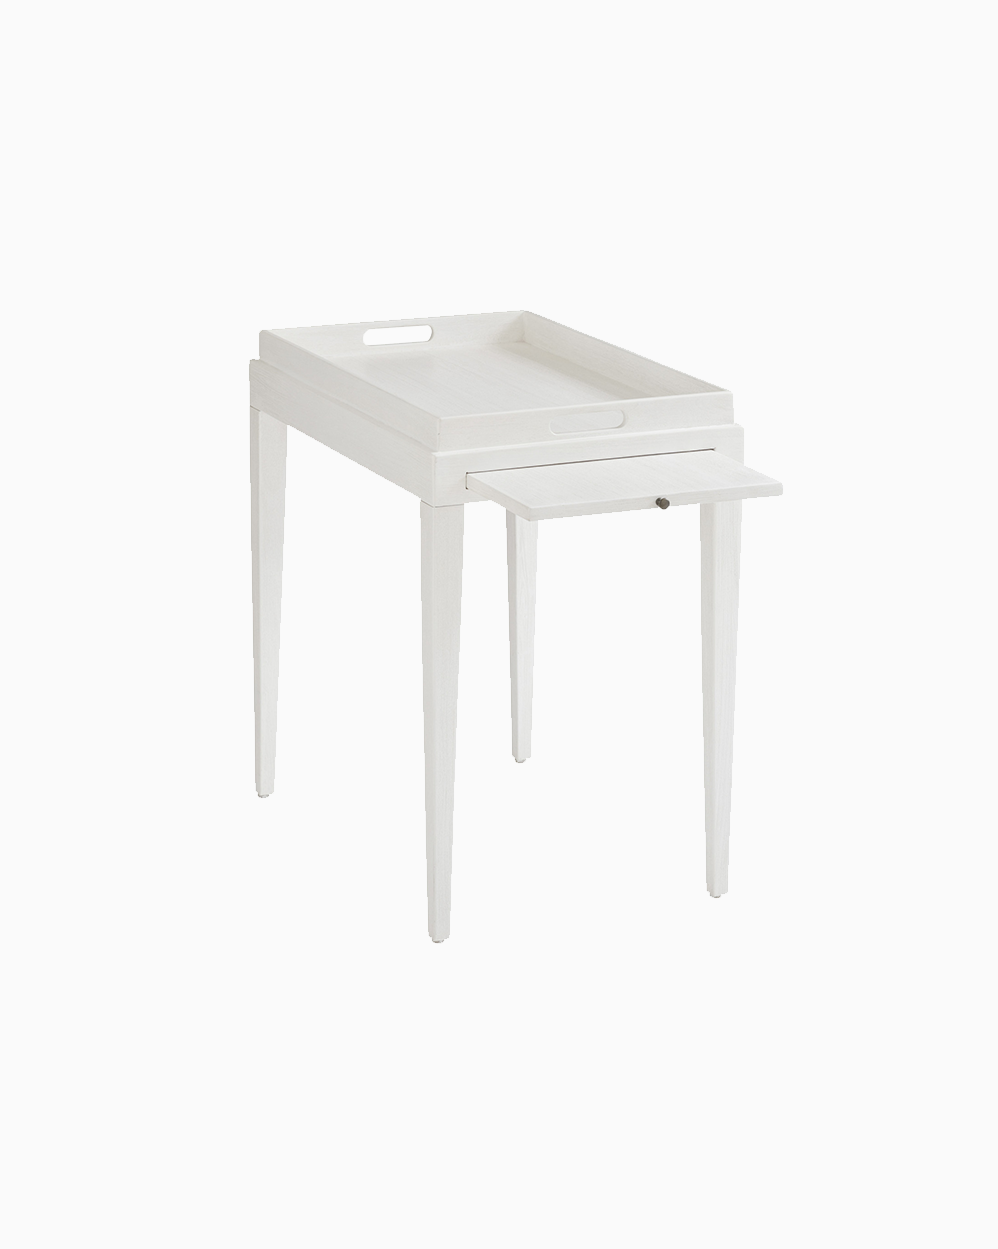 Broad River Rectangular End Table